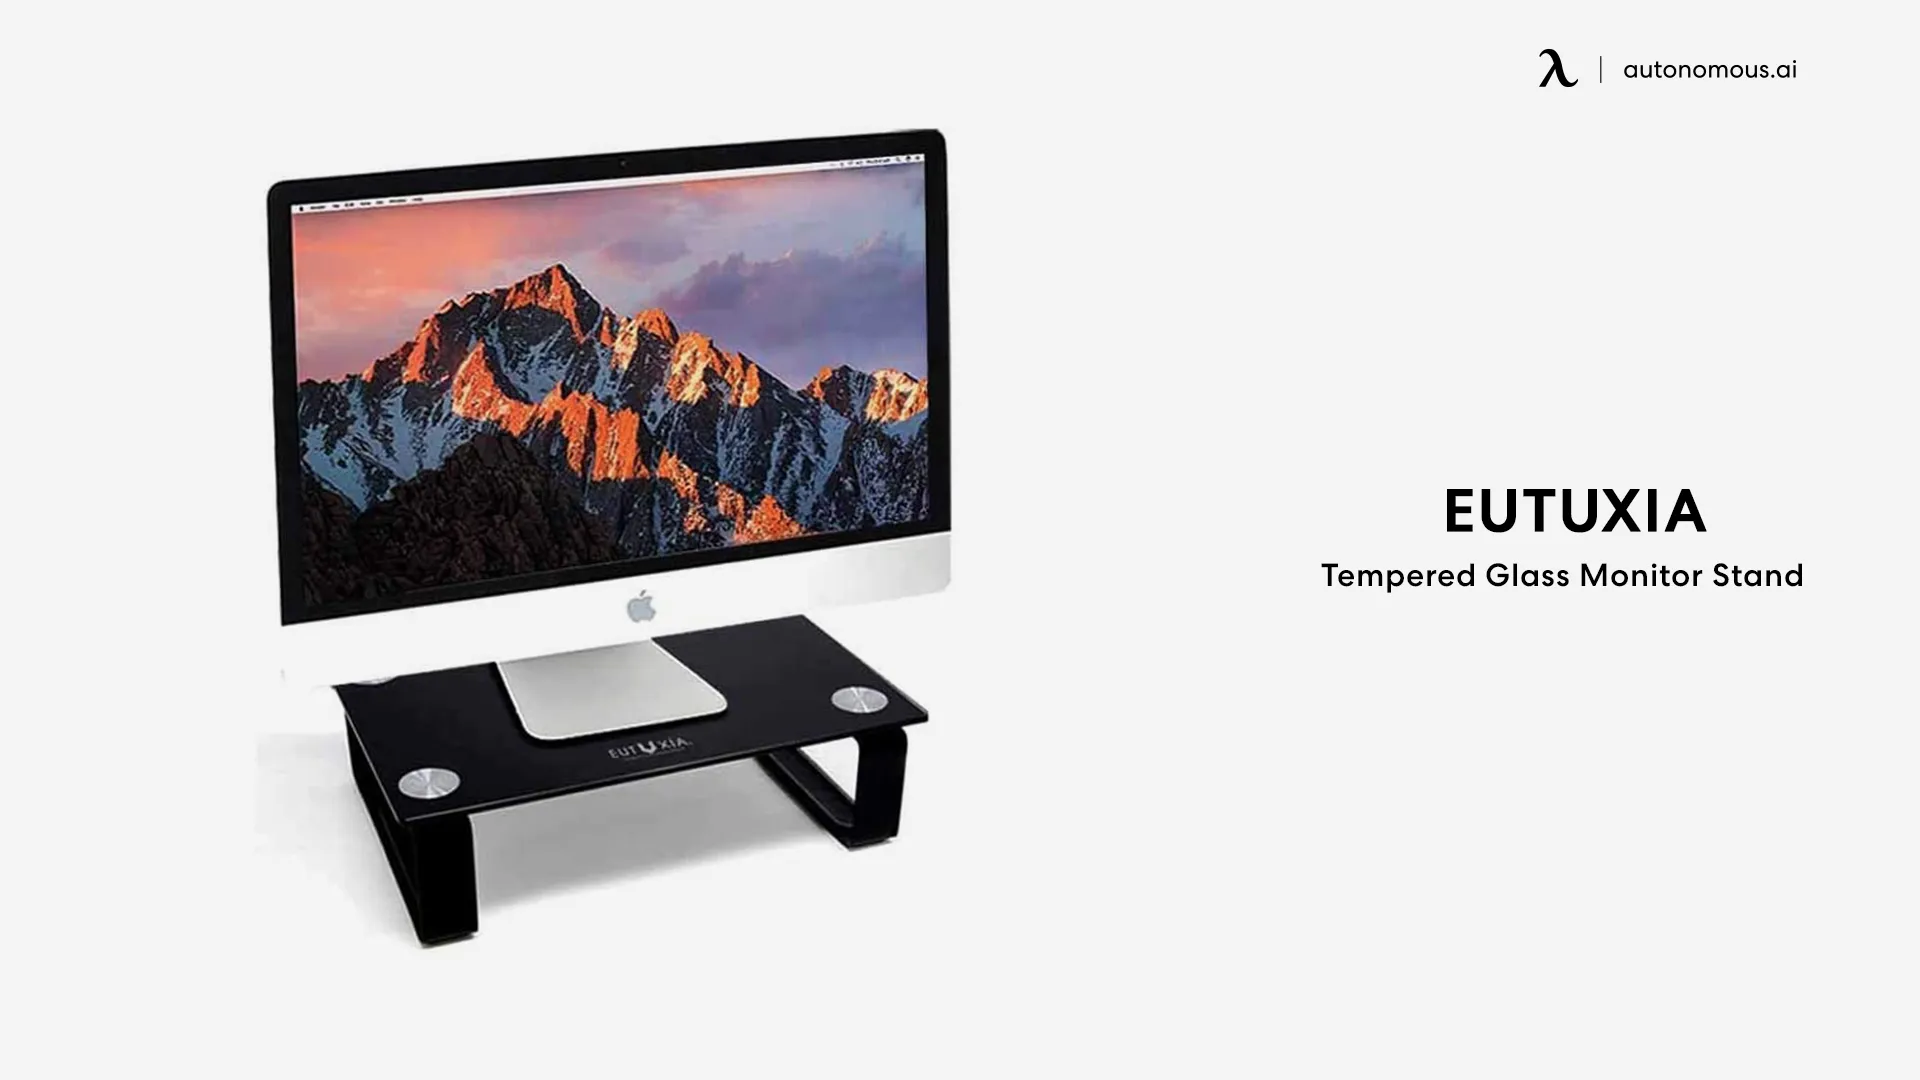 Eutuxia’s Tempered Glass Monitor Stand